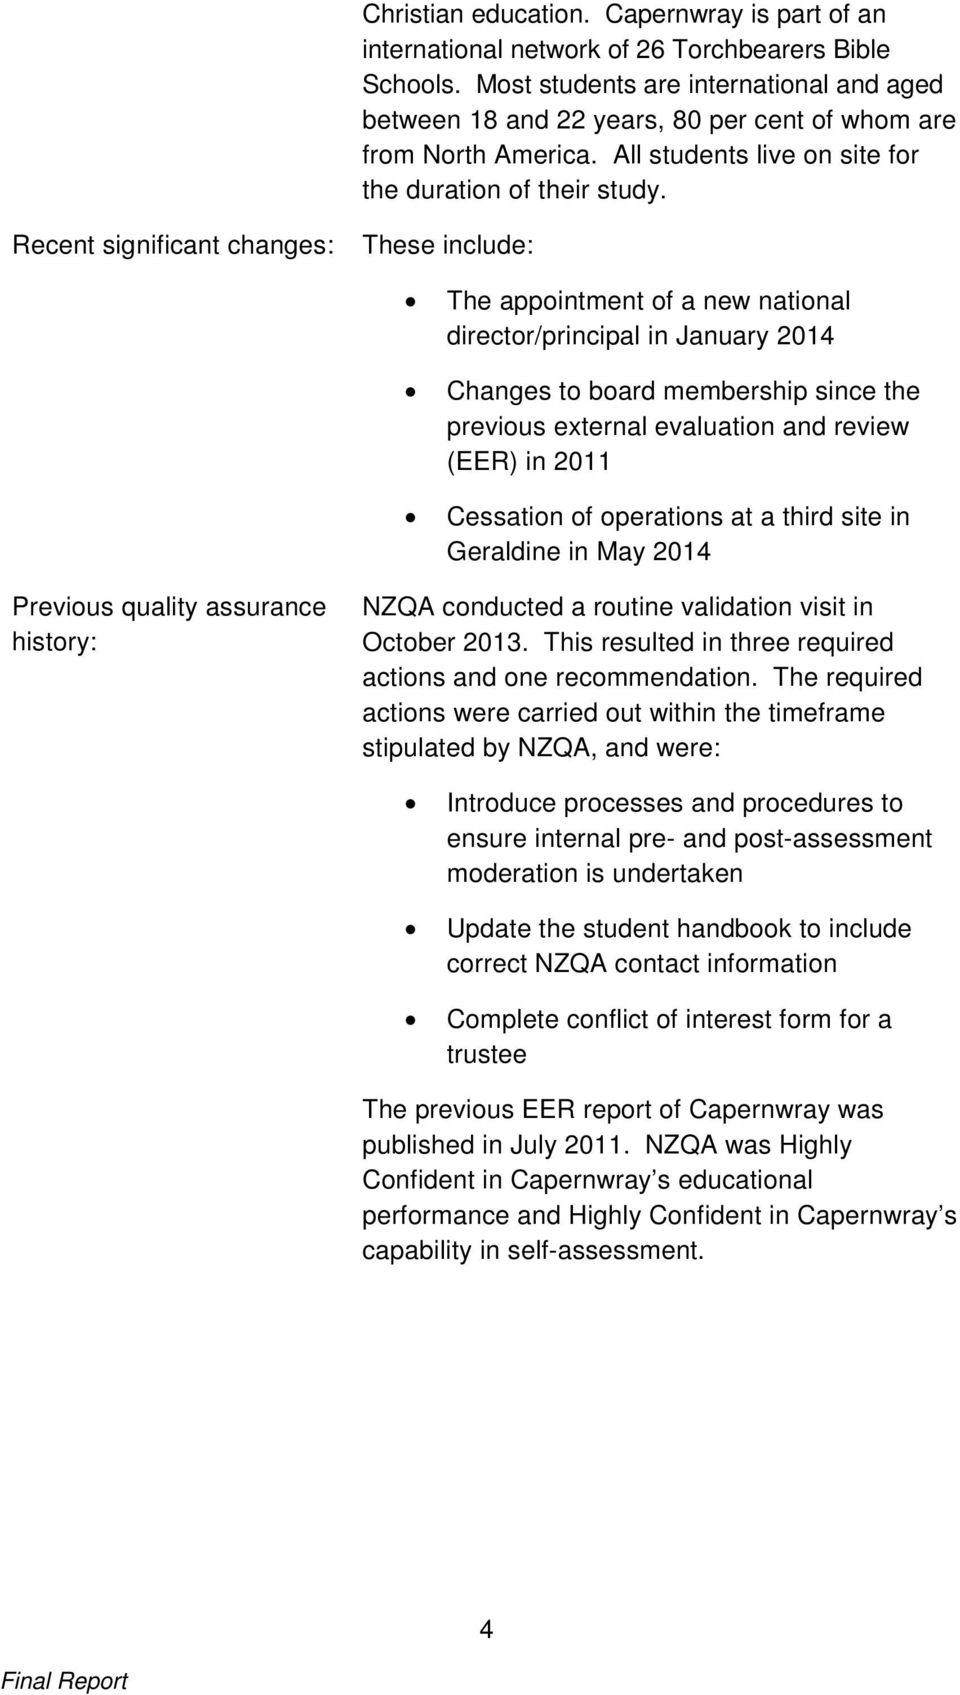 Recent significant changes: These include: The appointment of a new national director/principal in January 2014 Changes to board membership since the previous external evaluation and review (EER) in